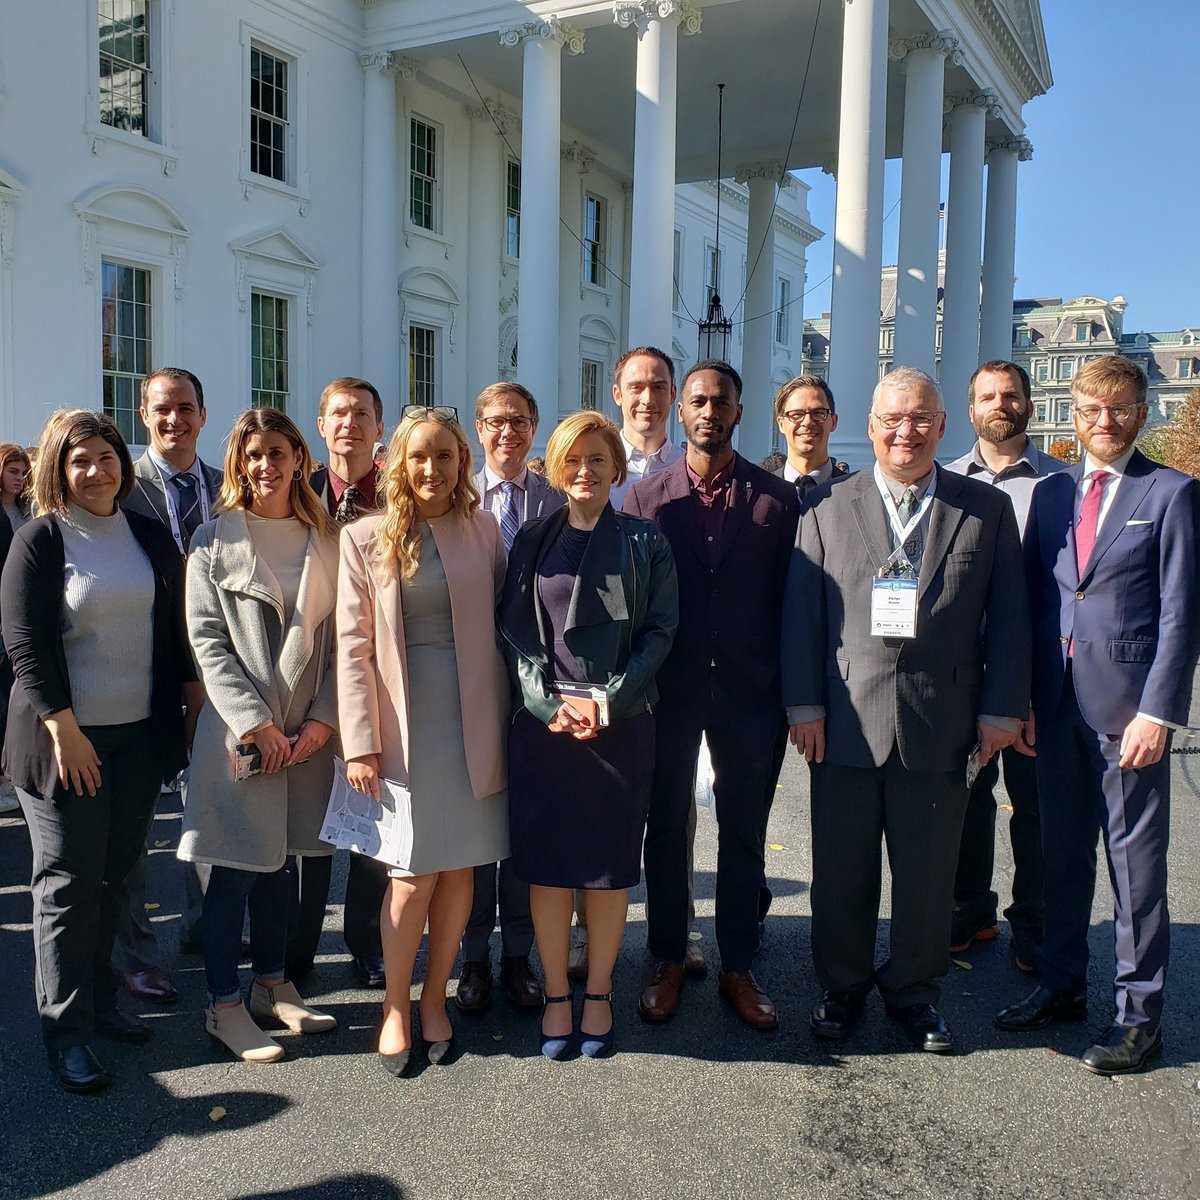 Team Canada had a great visit to the White House this morning. It was a beautiful day for a tour of the mansion. 
#IAC2019 #CanadaPavilion2019 #whitehouse #tour #WashingtonDC